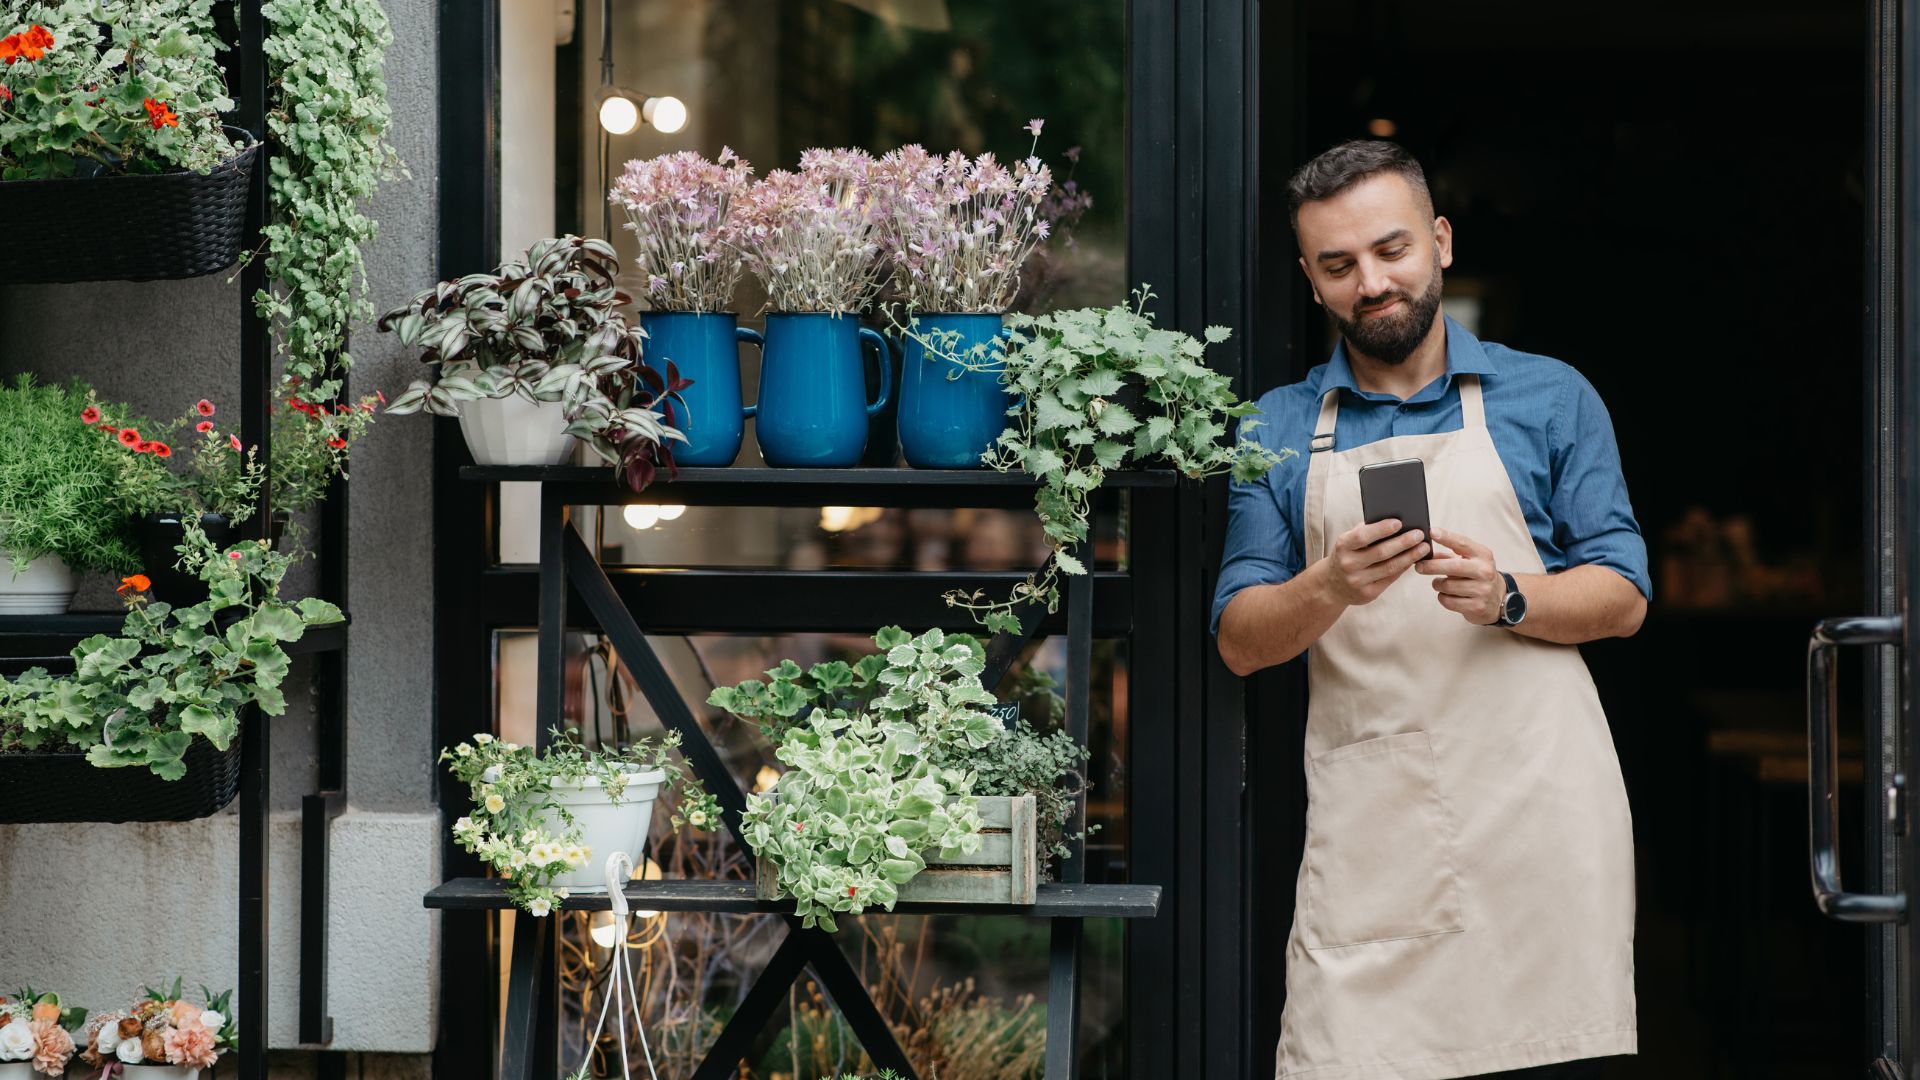 A man in an apron is using his phone outside of a flower shop.